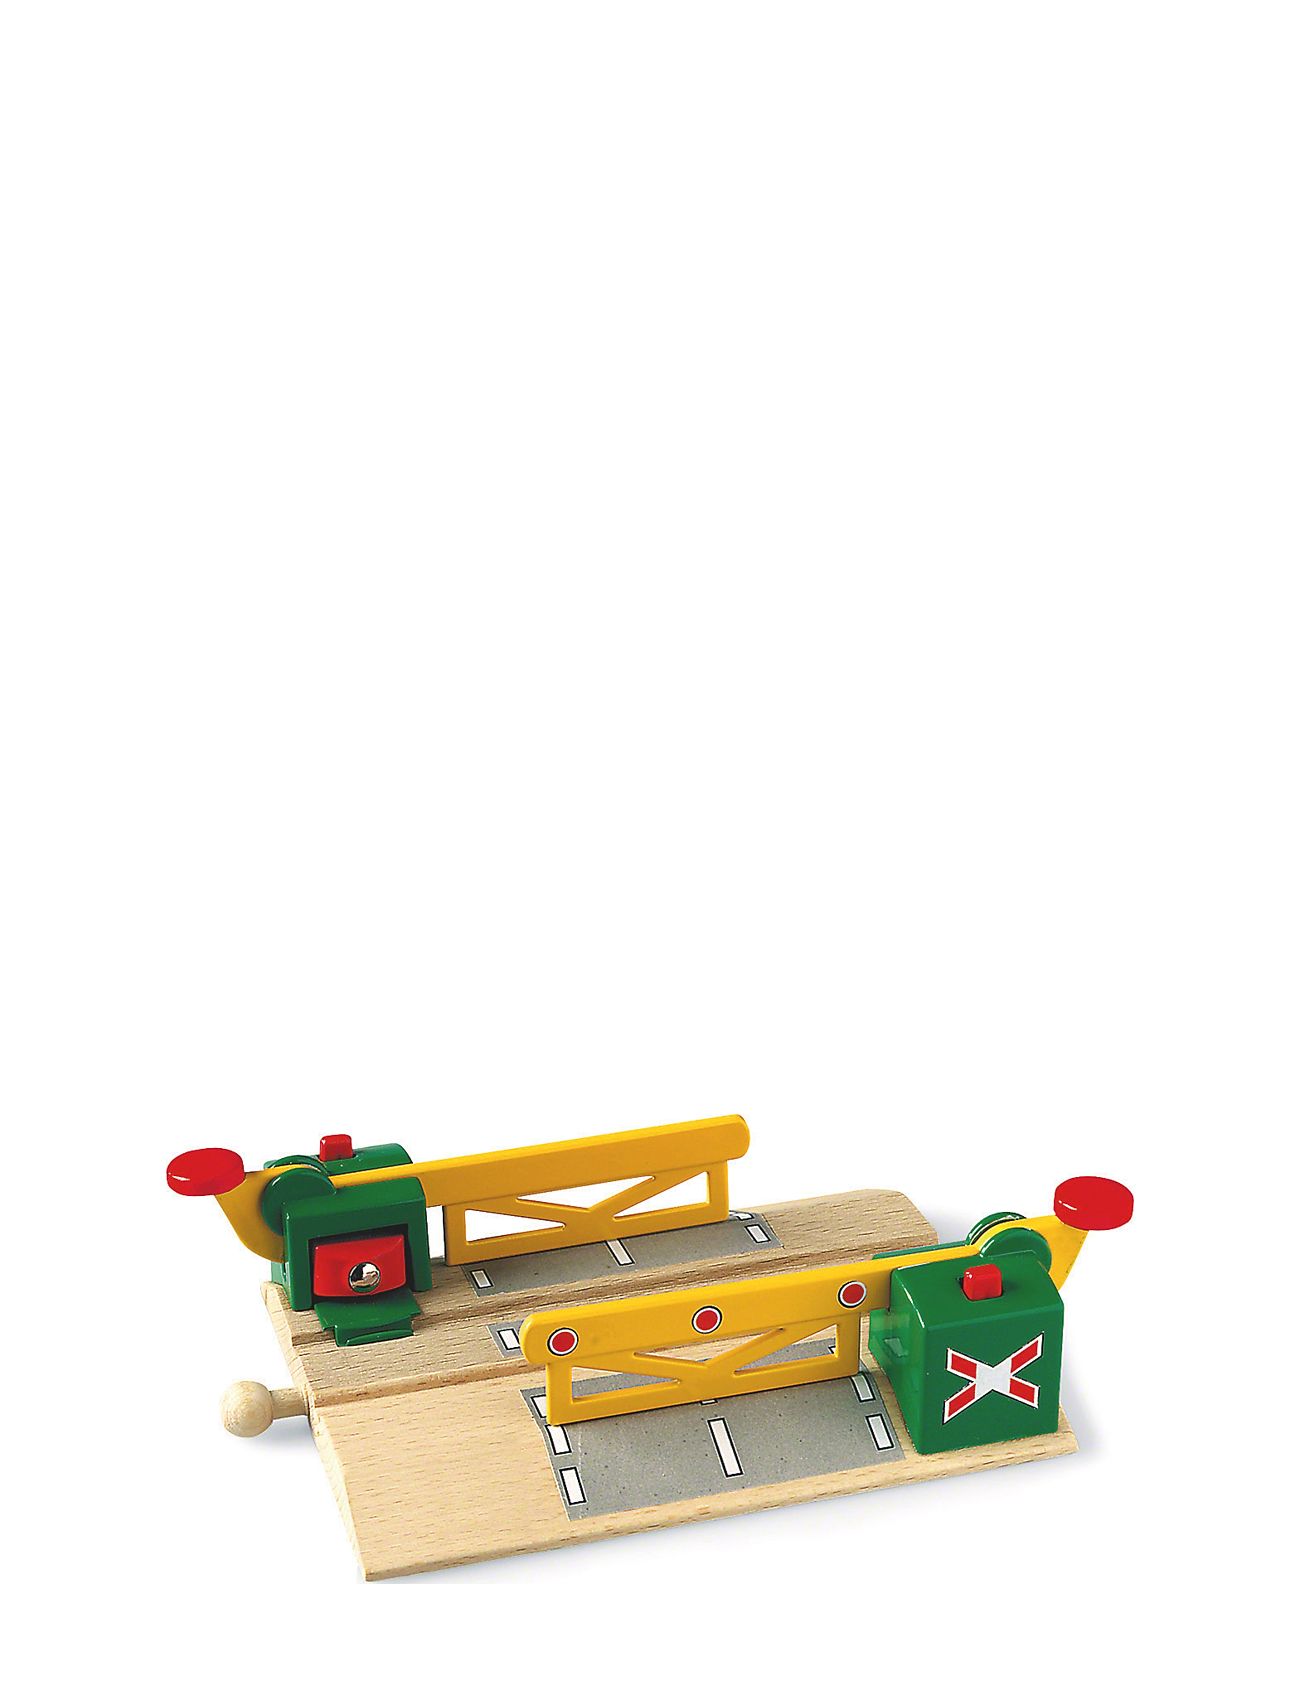 Brio 33750 Jernbaneoverskæring, Magnet Toys Toy Cars & Vehicles Toy Vehicles Train Accessories Multi/patterned BRIO